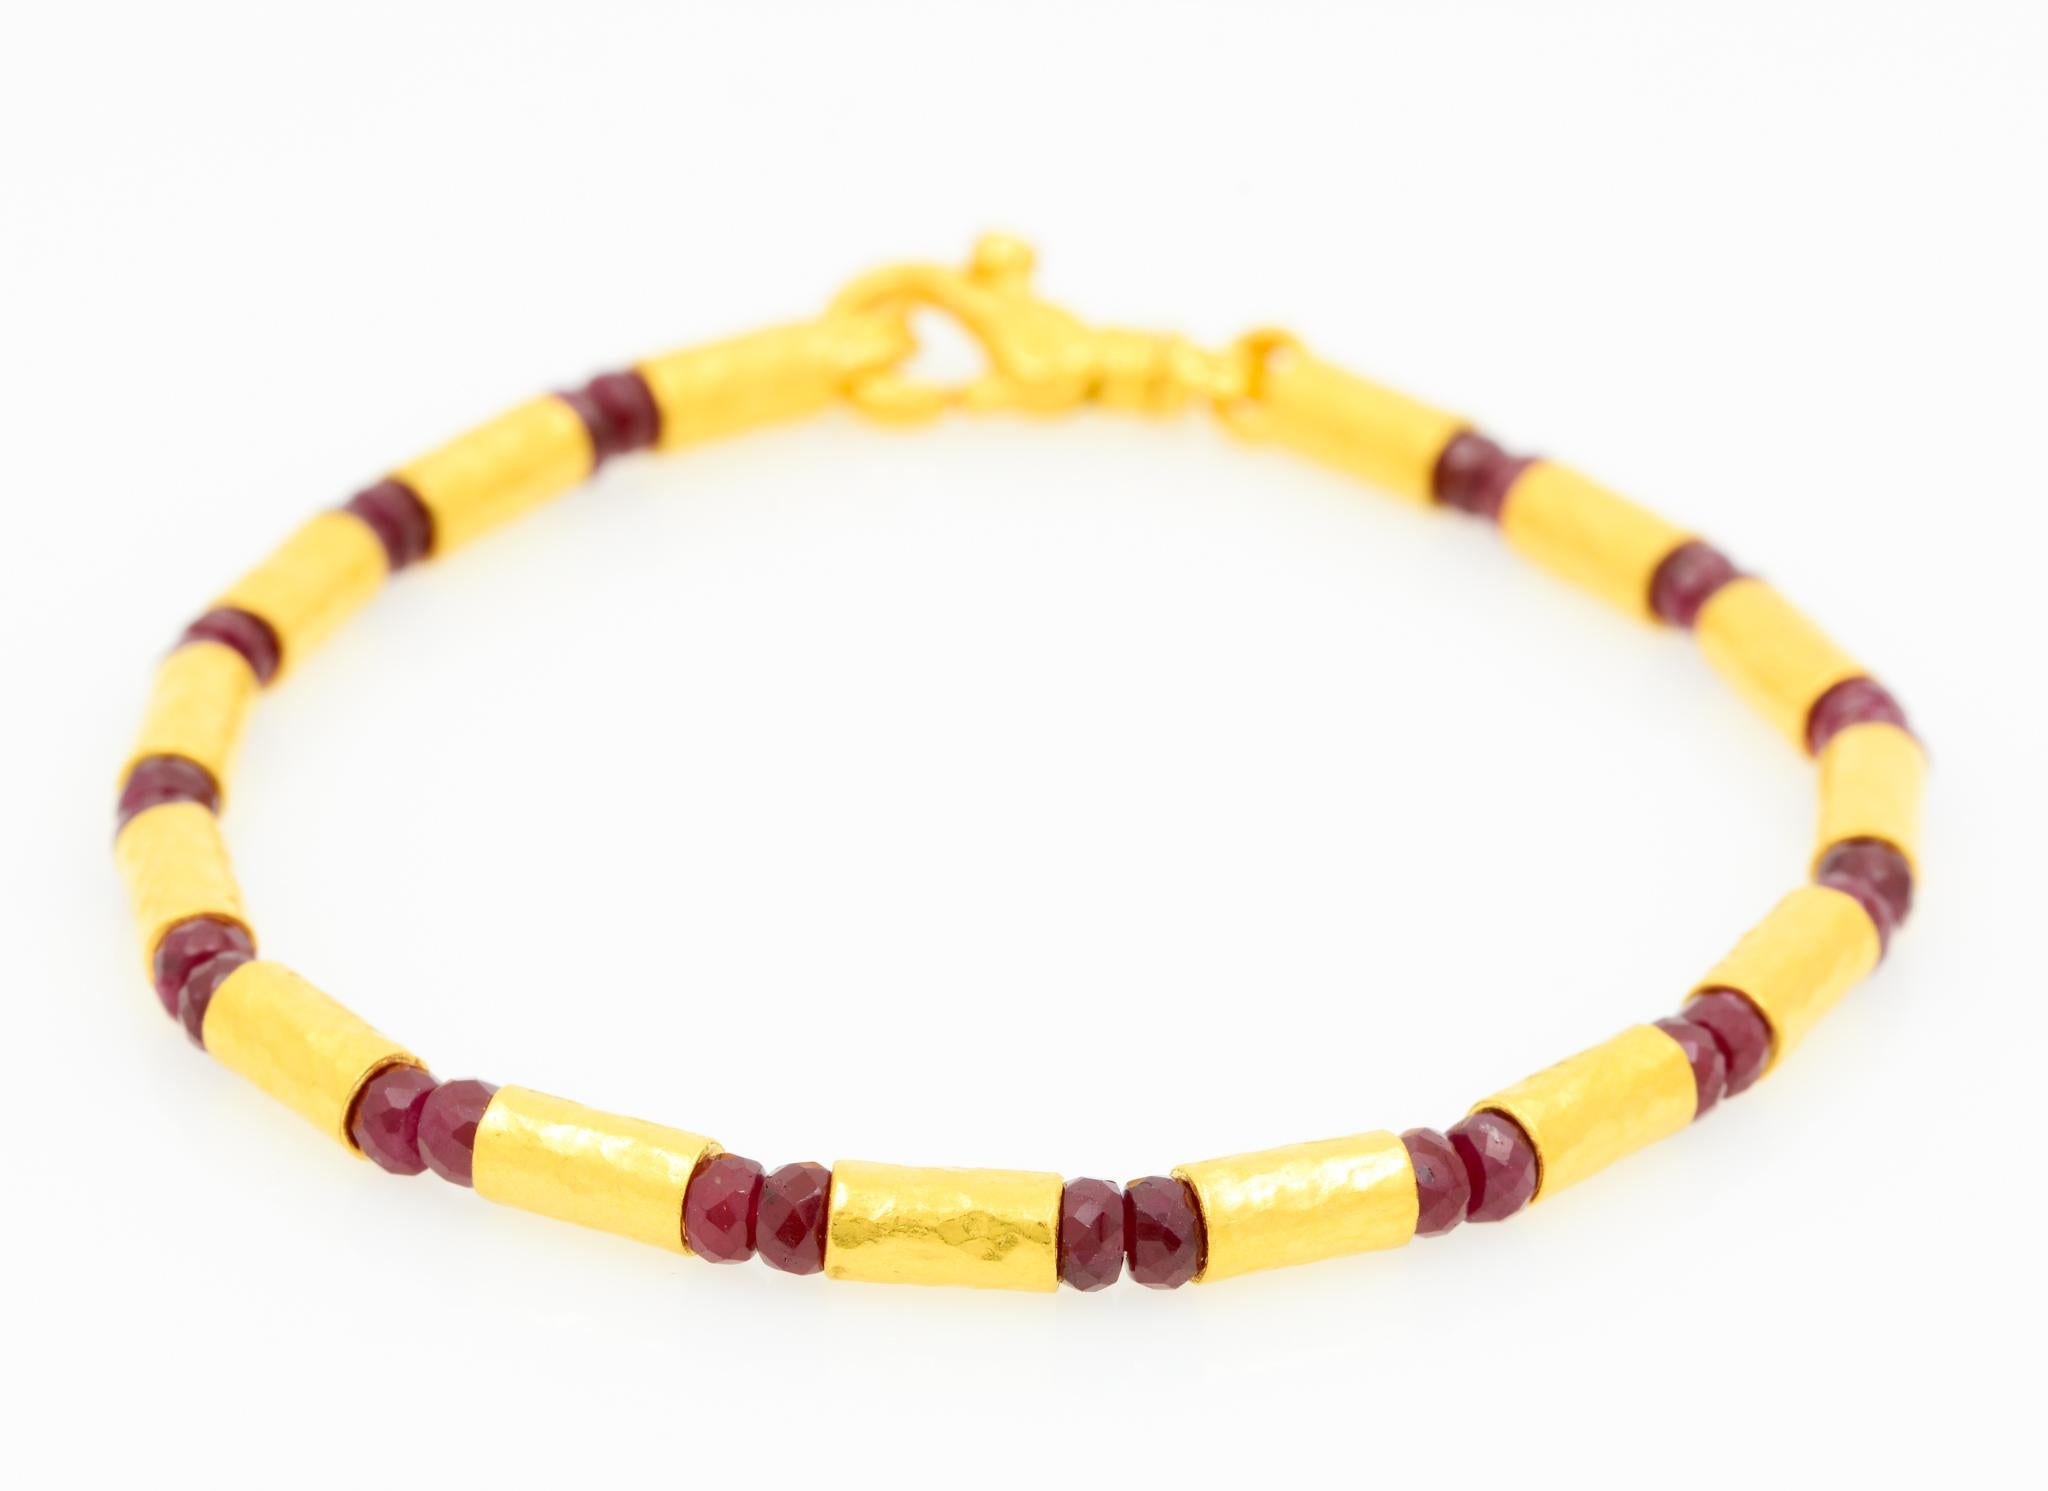 Made by Gurhan, this 24 karat yellow gold beaded bracelet features 15 hammered gold cylinder beads alternating with 28 round faceted ruby beads weighing approximately 9.90 carats combined. The bracelet is 7.5 inches long and has a lobster claw clasp.